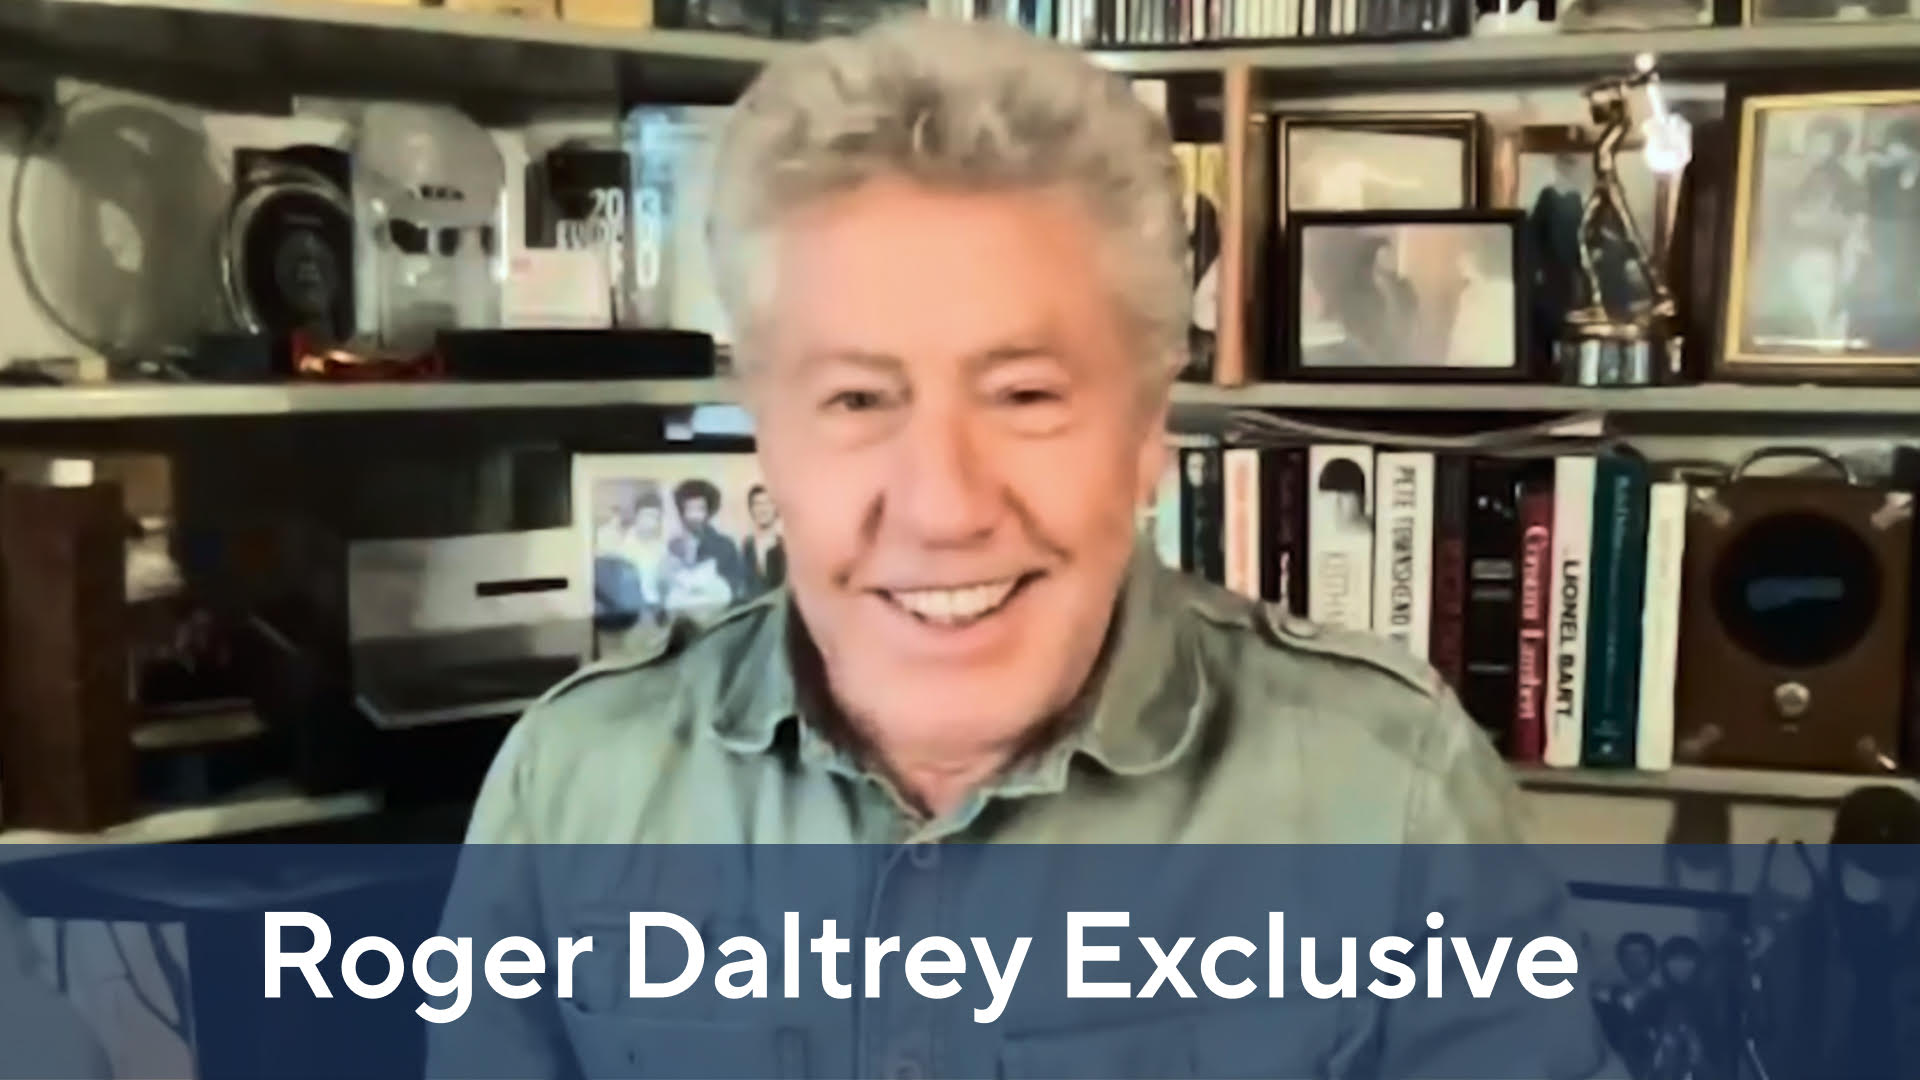 The Who's Roger Daltrey Gives Exclusive Interview On The Coda Collection